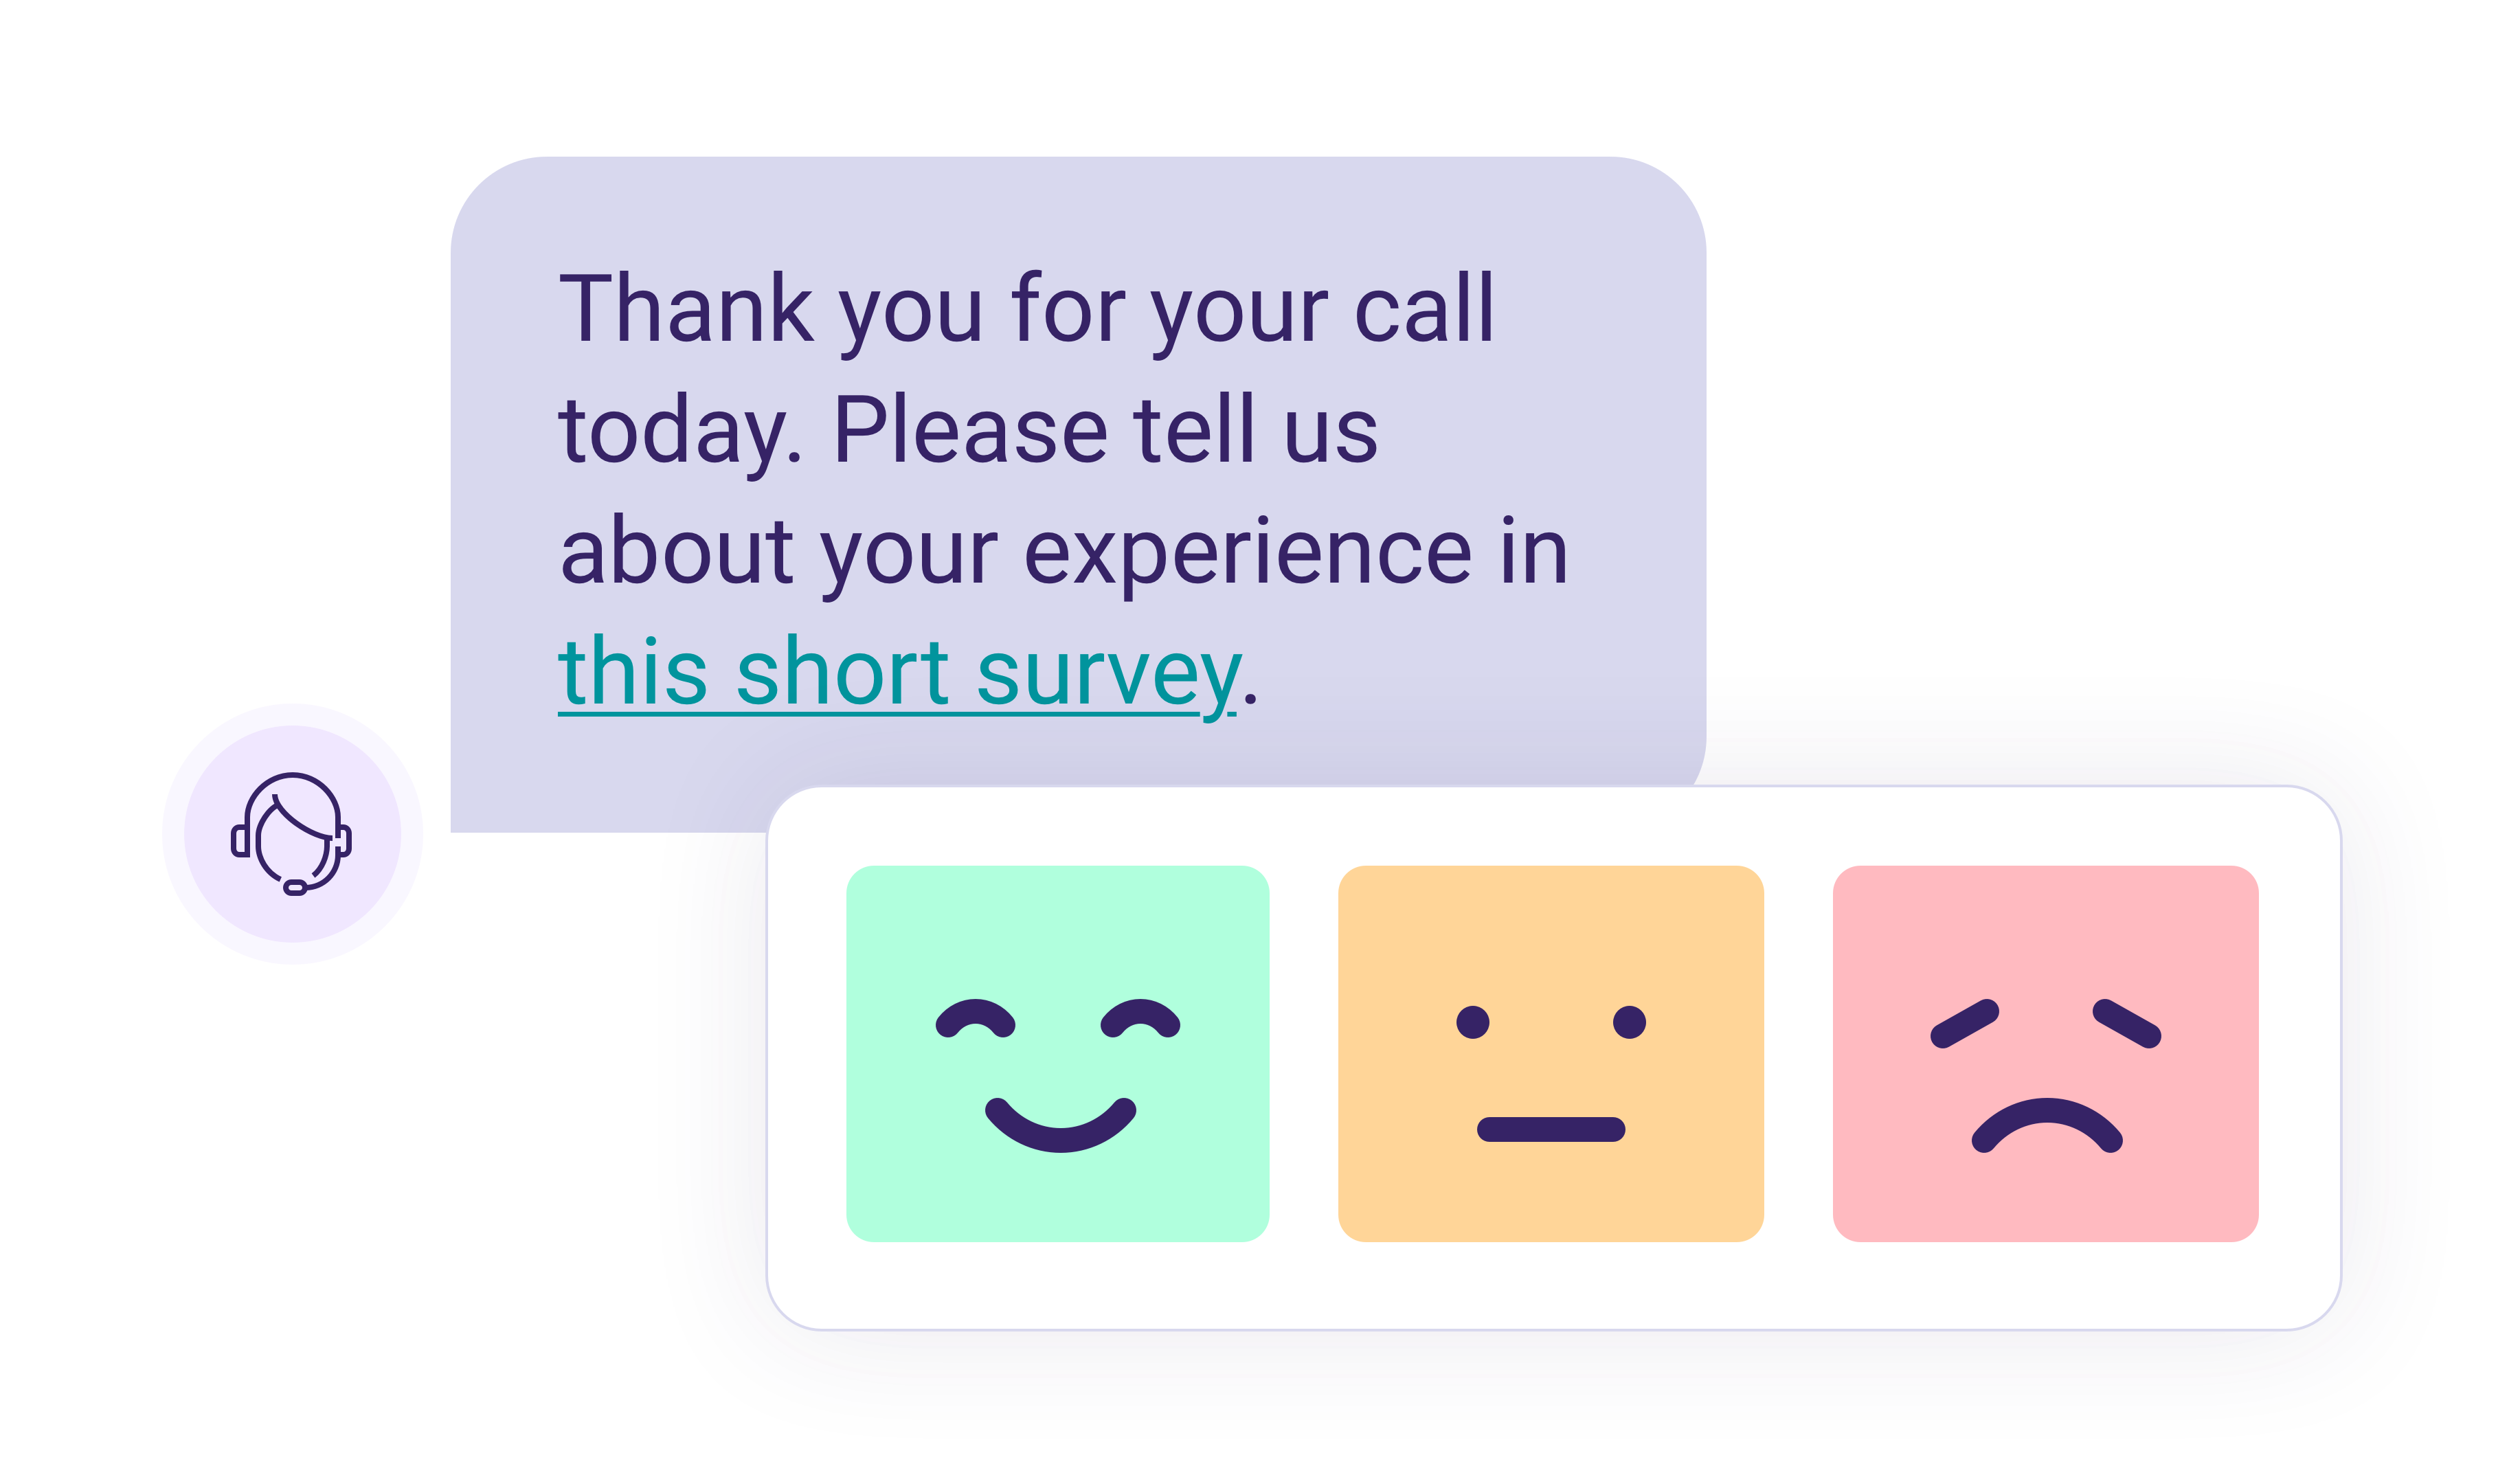 Example text message "Thank you for your call today. Please let us know about your experience in this survey."